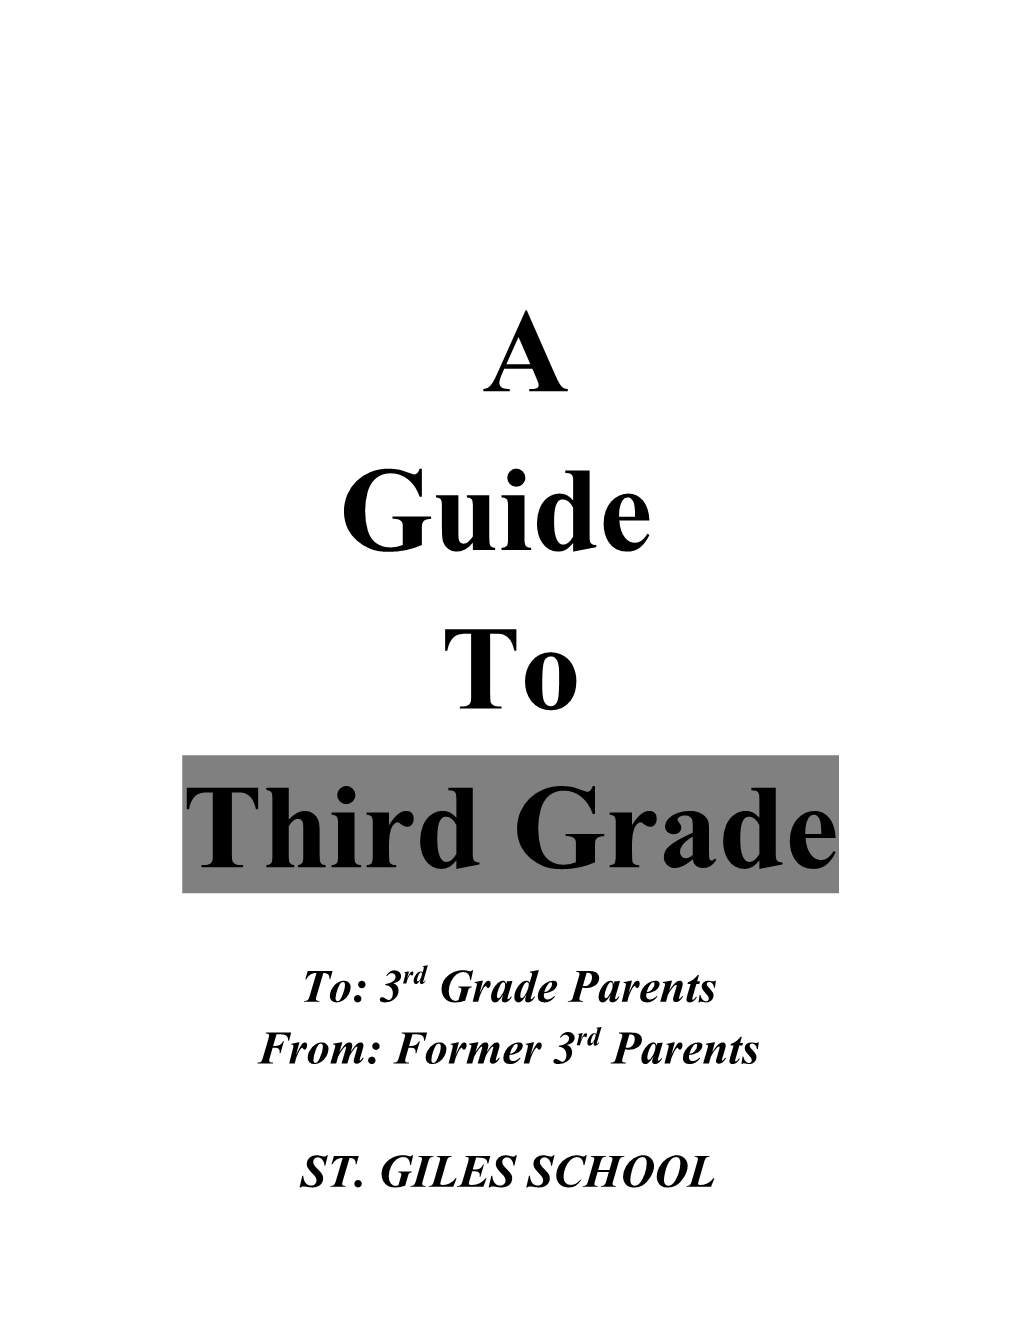 To: 3Rd Grade Parents